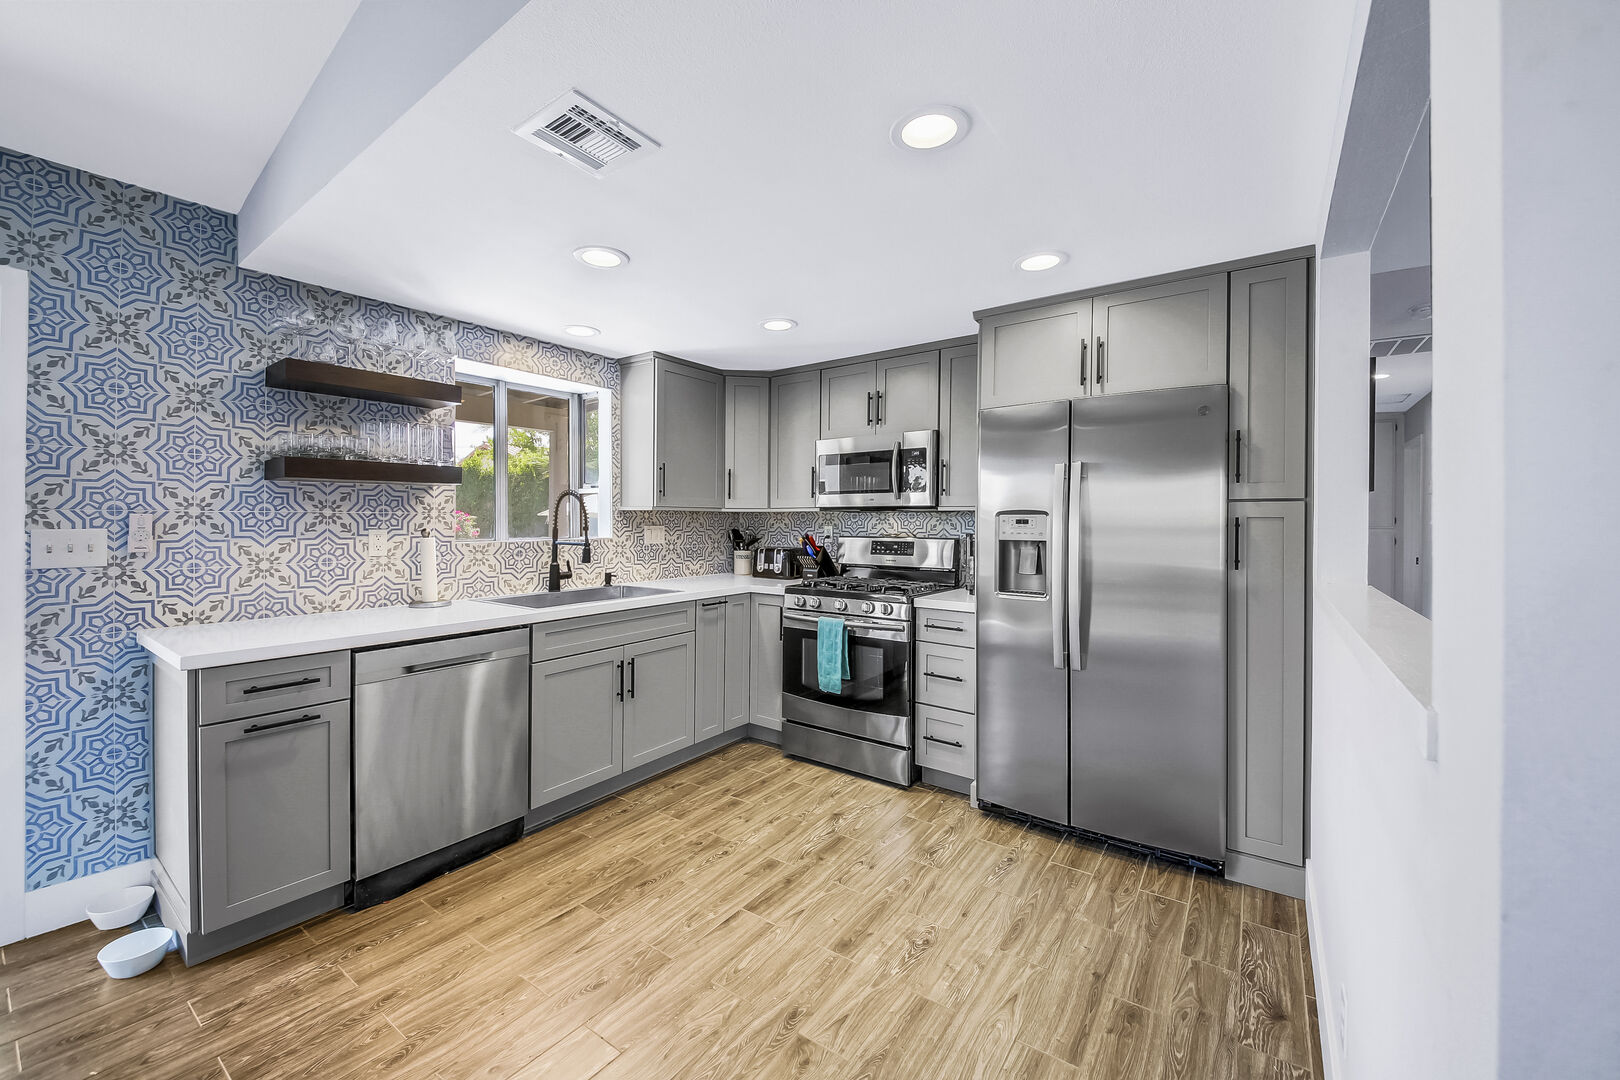 The fully-equipped kitchen features stunning stainless steel.